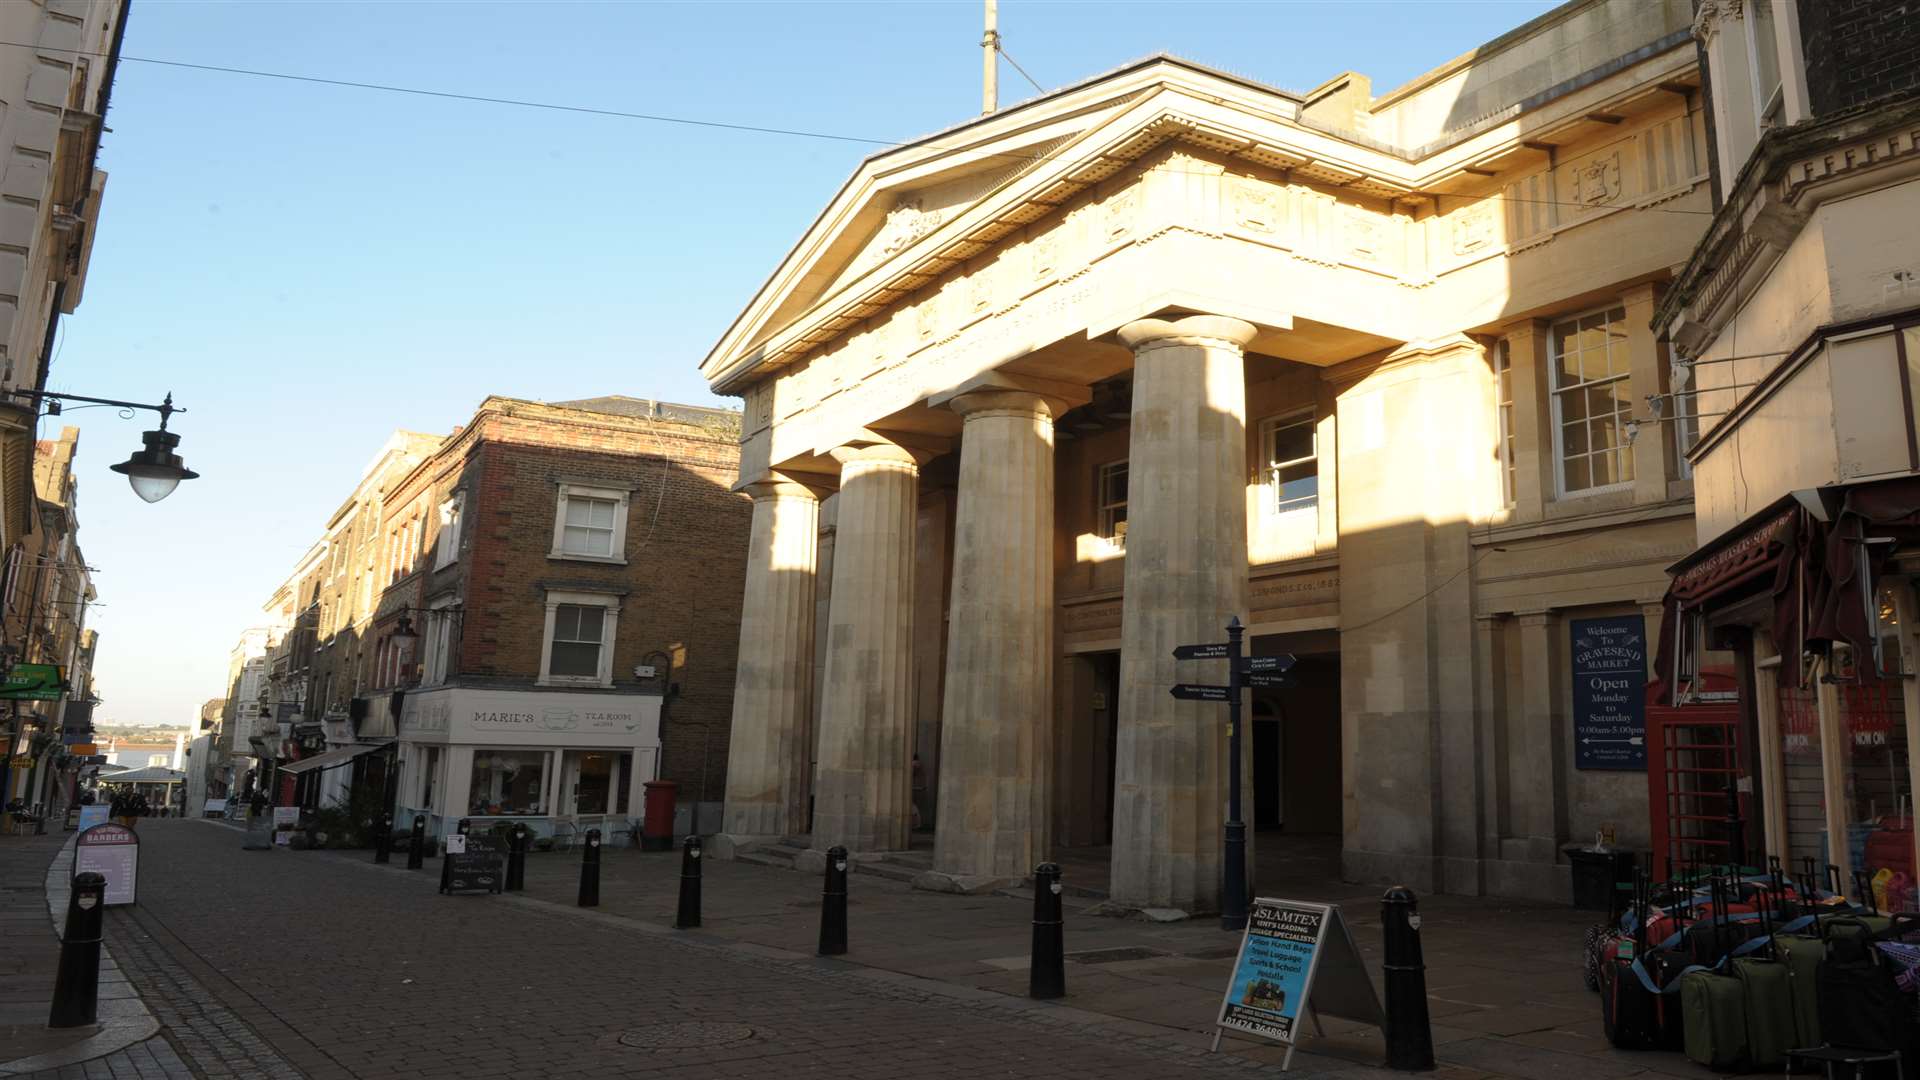 Gravesend Old Town Hall, High Street.